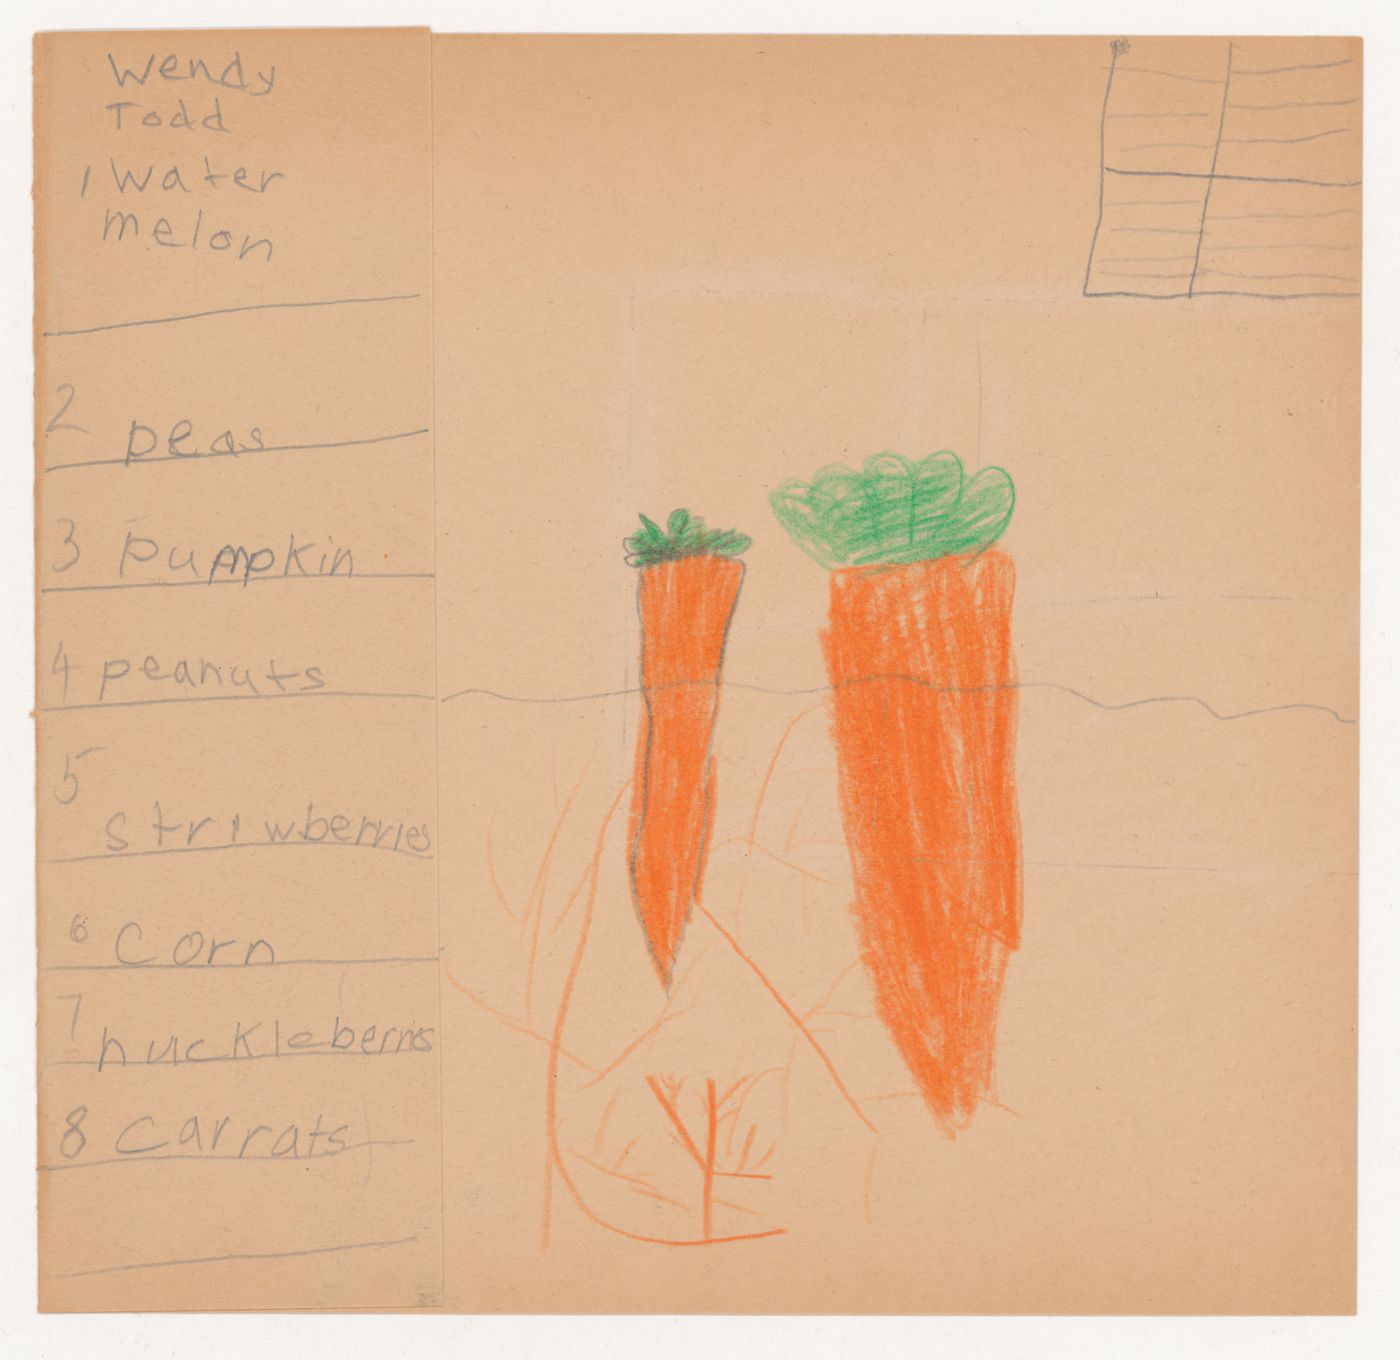 Child's drawing and list of fruits and vegetables for the ideal garden